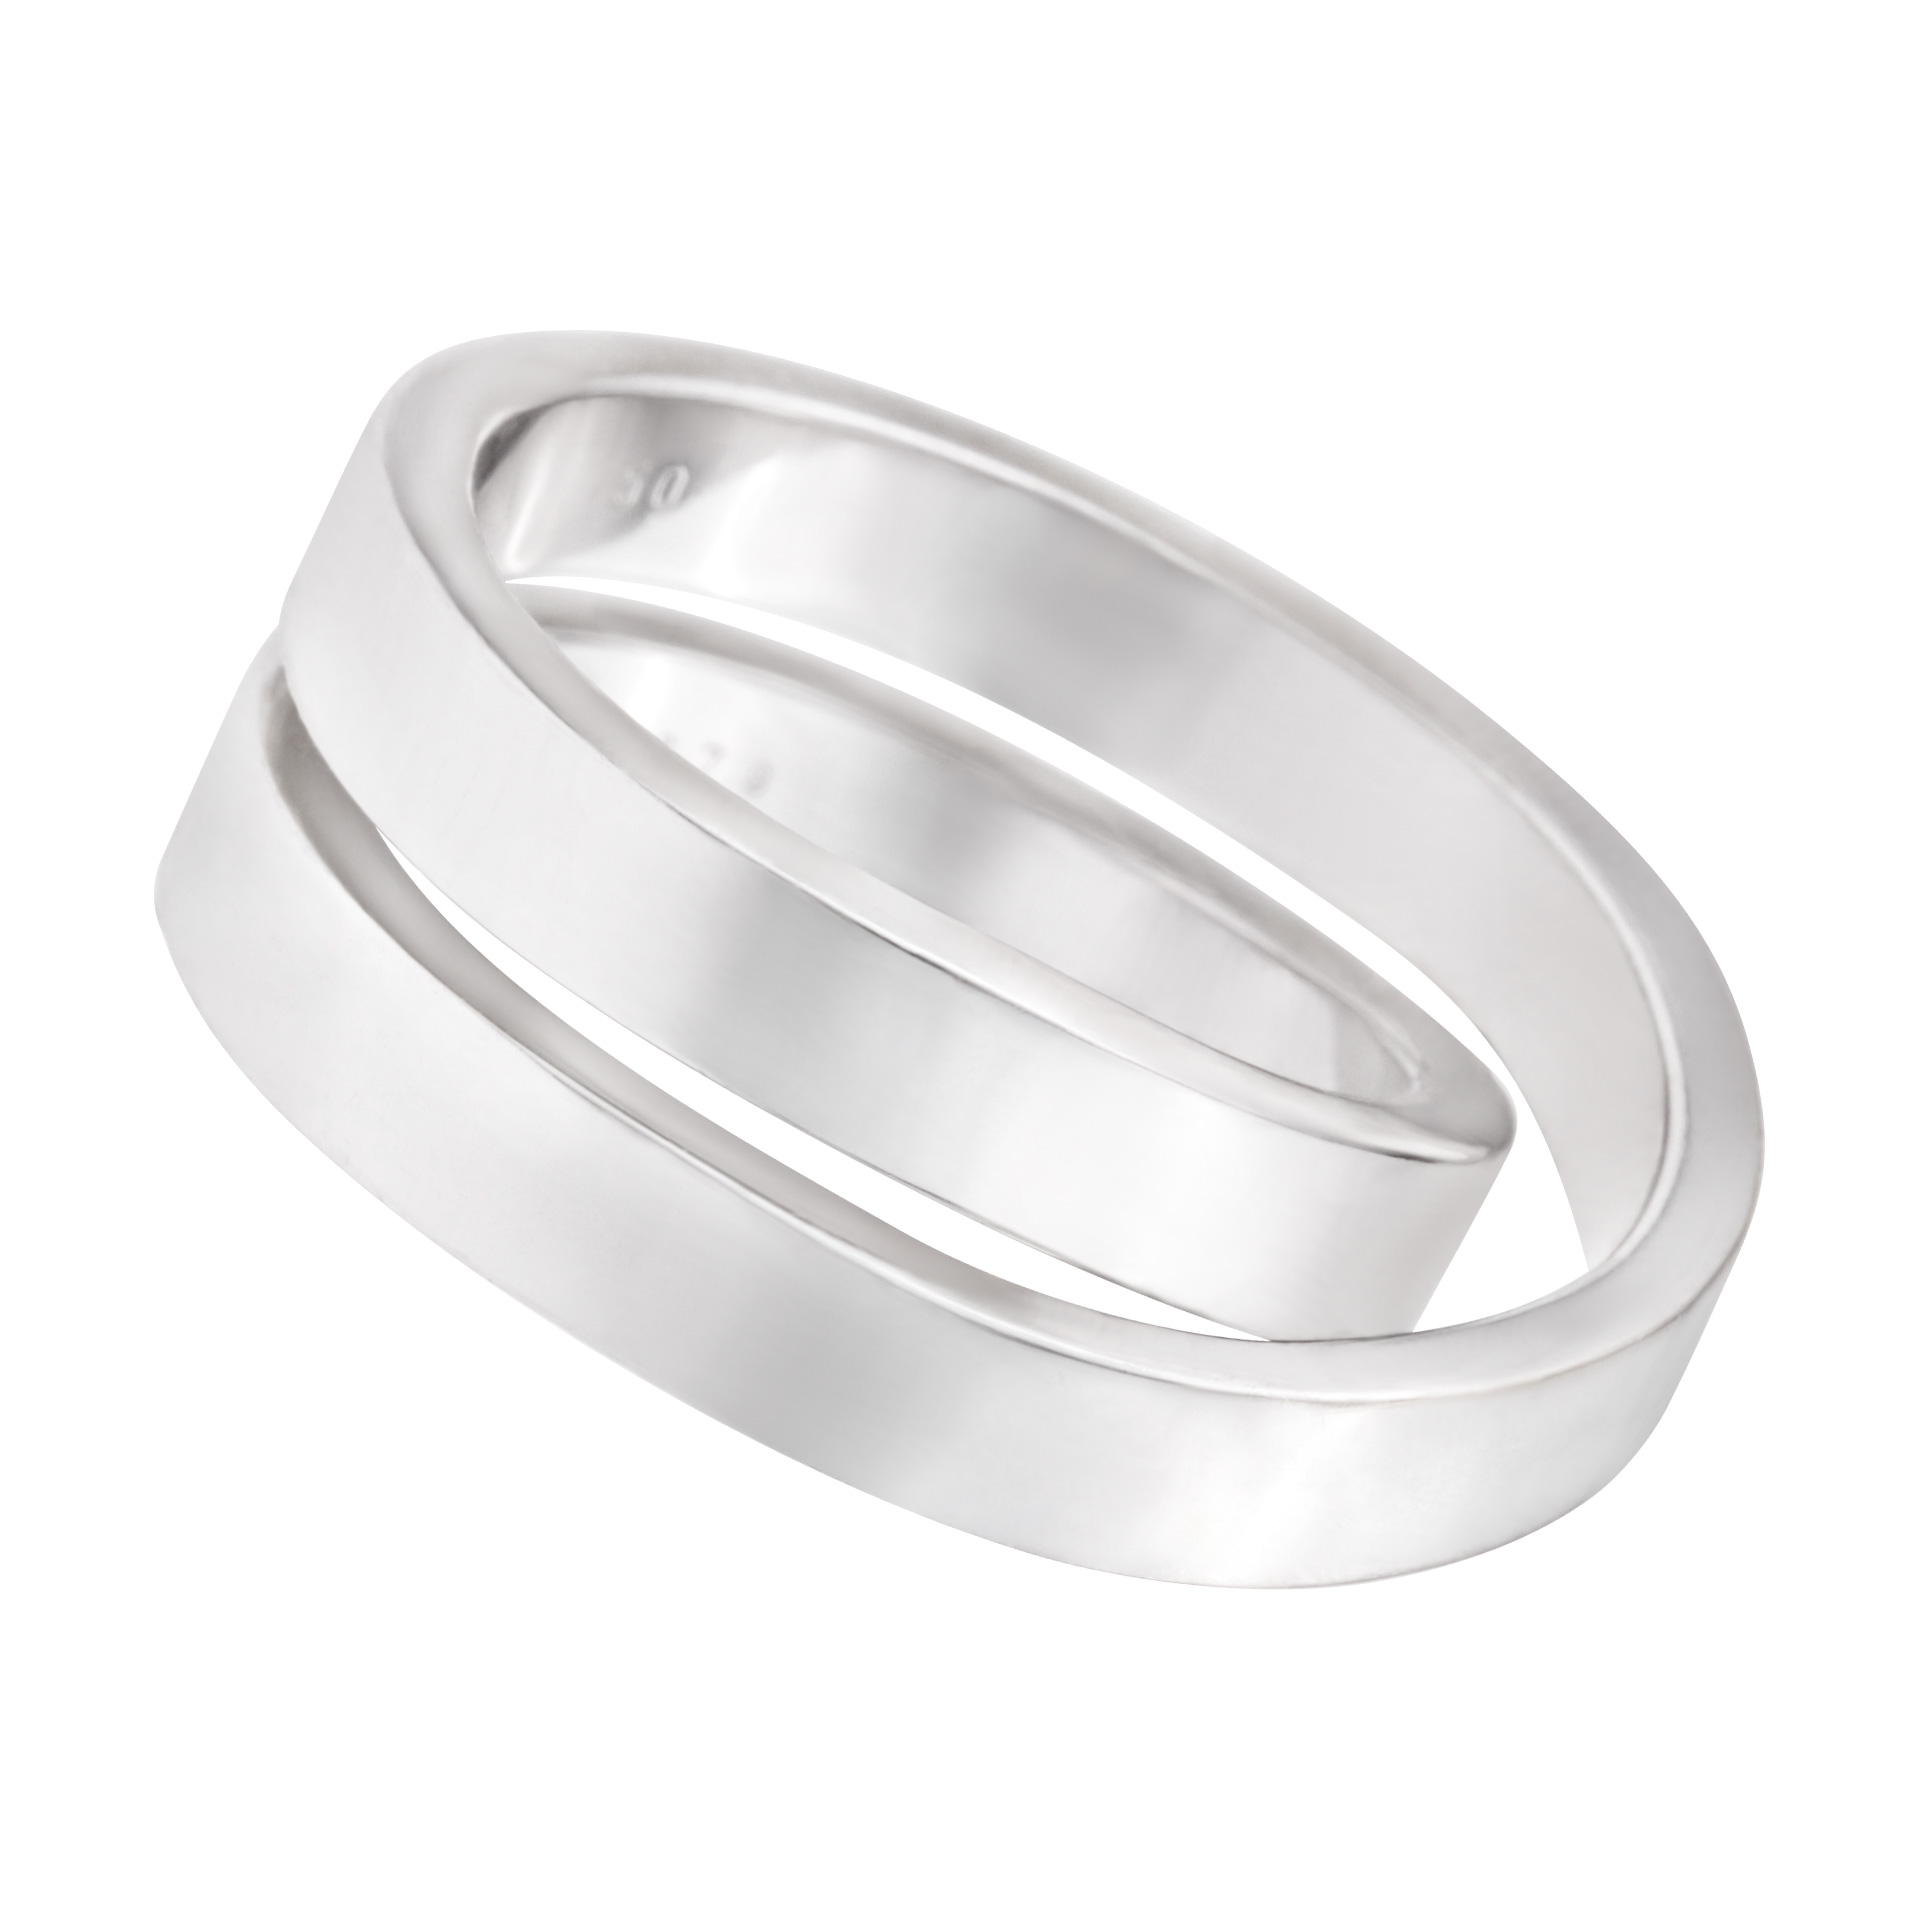 Cartier Crossover ring in 18k white gold image 1